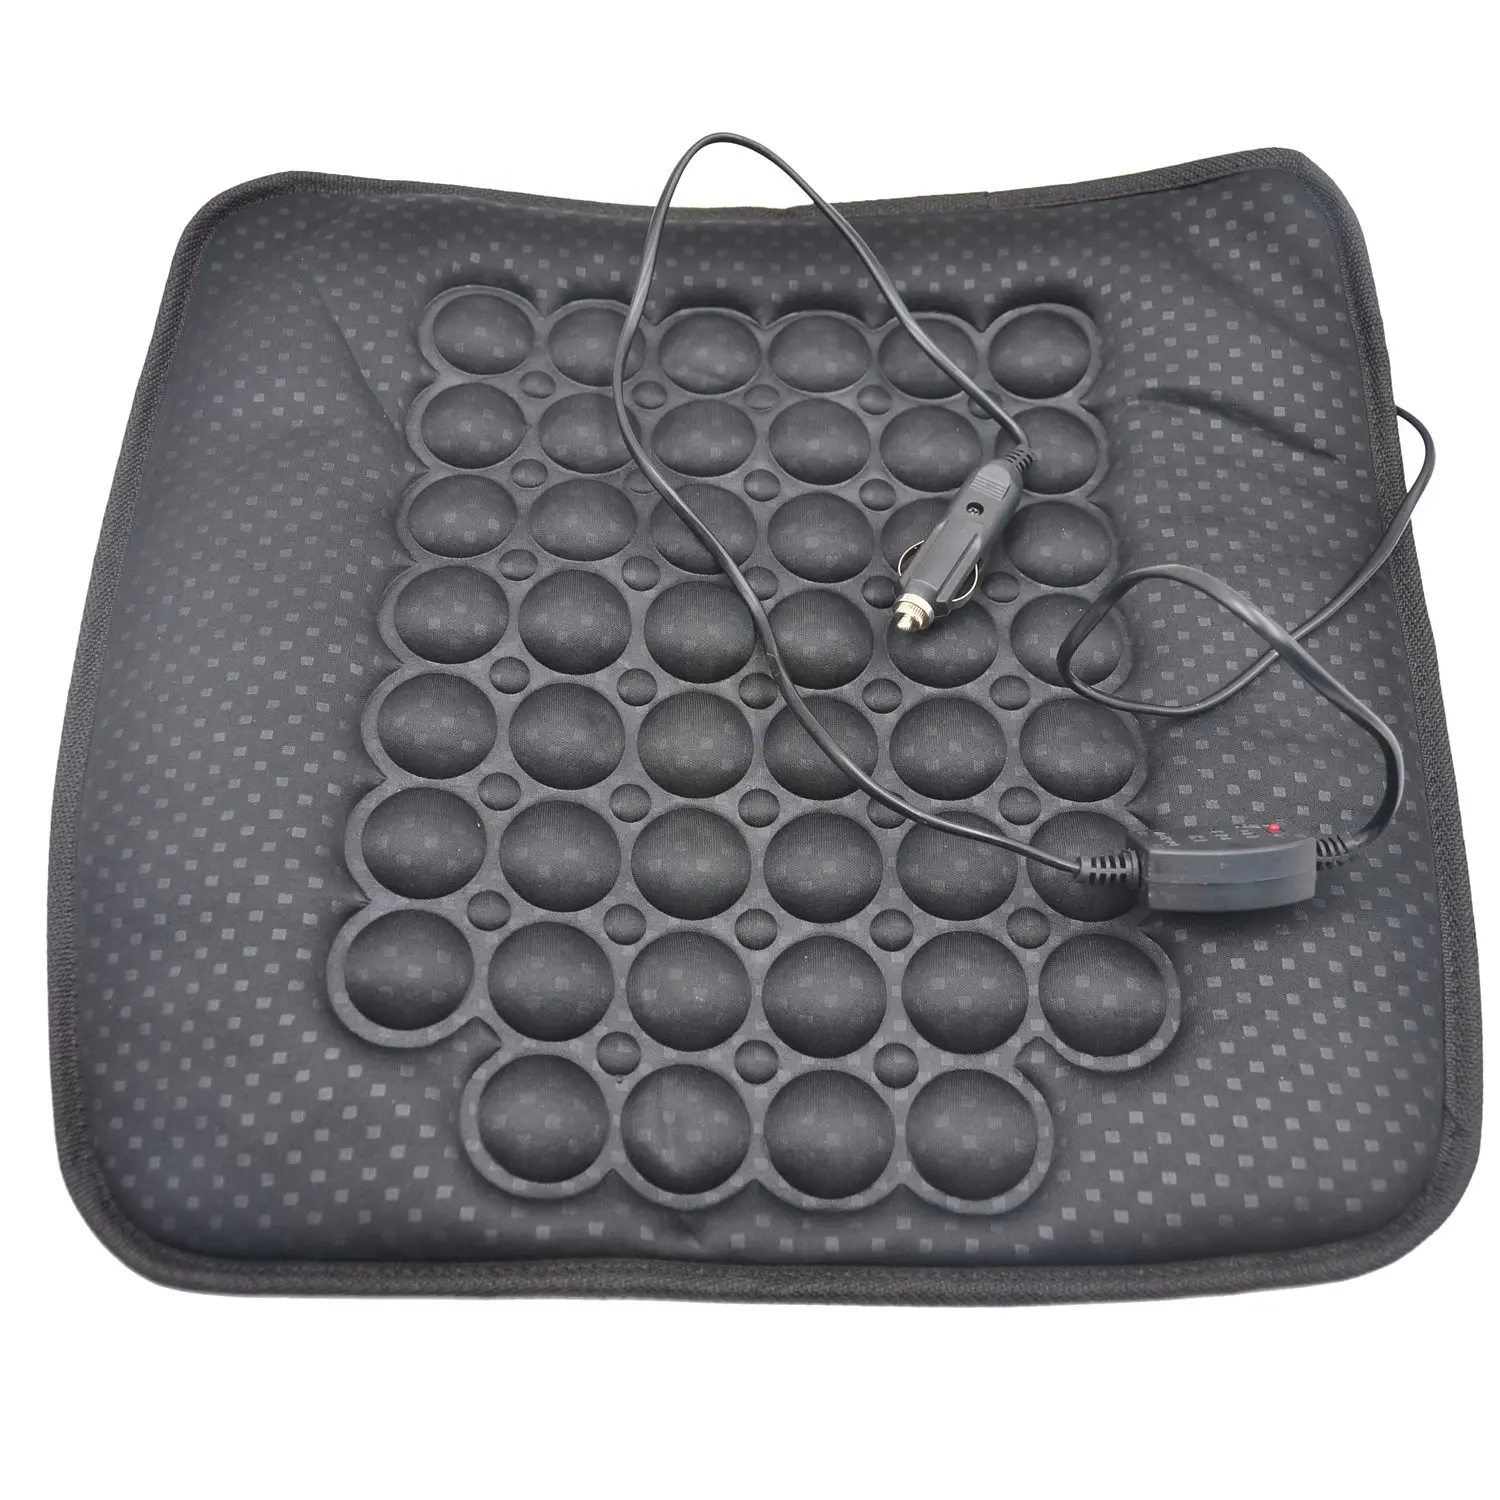 

12V Car Heated Seat Cover Cushion Auto Heating Warmer Pad Car Electric Heating Seat Mat Safety